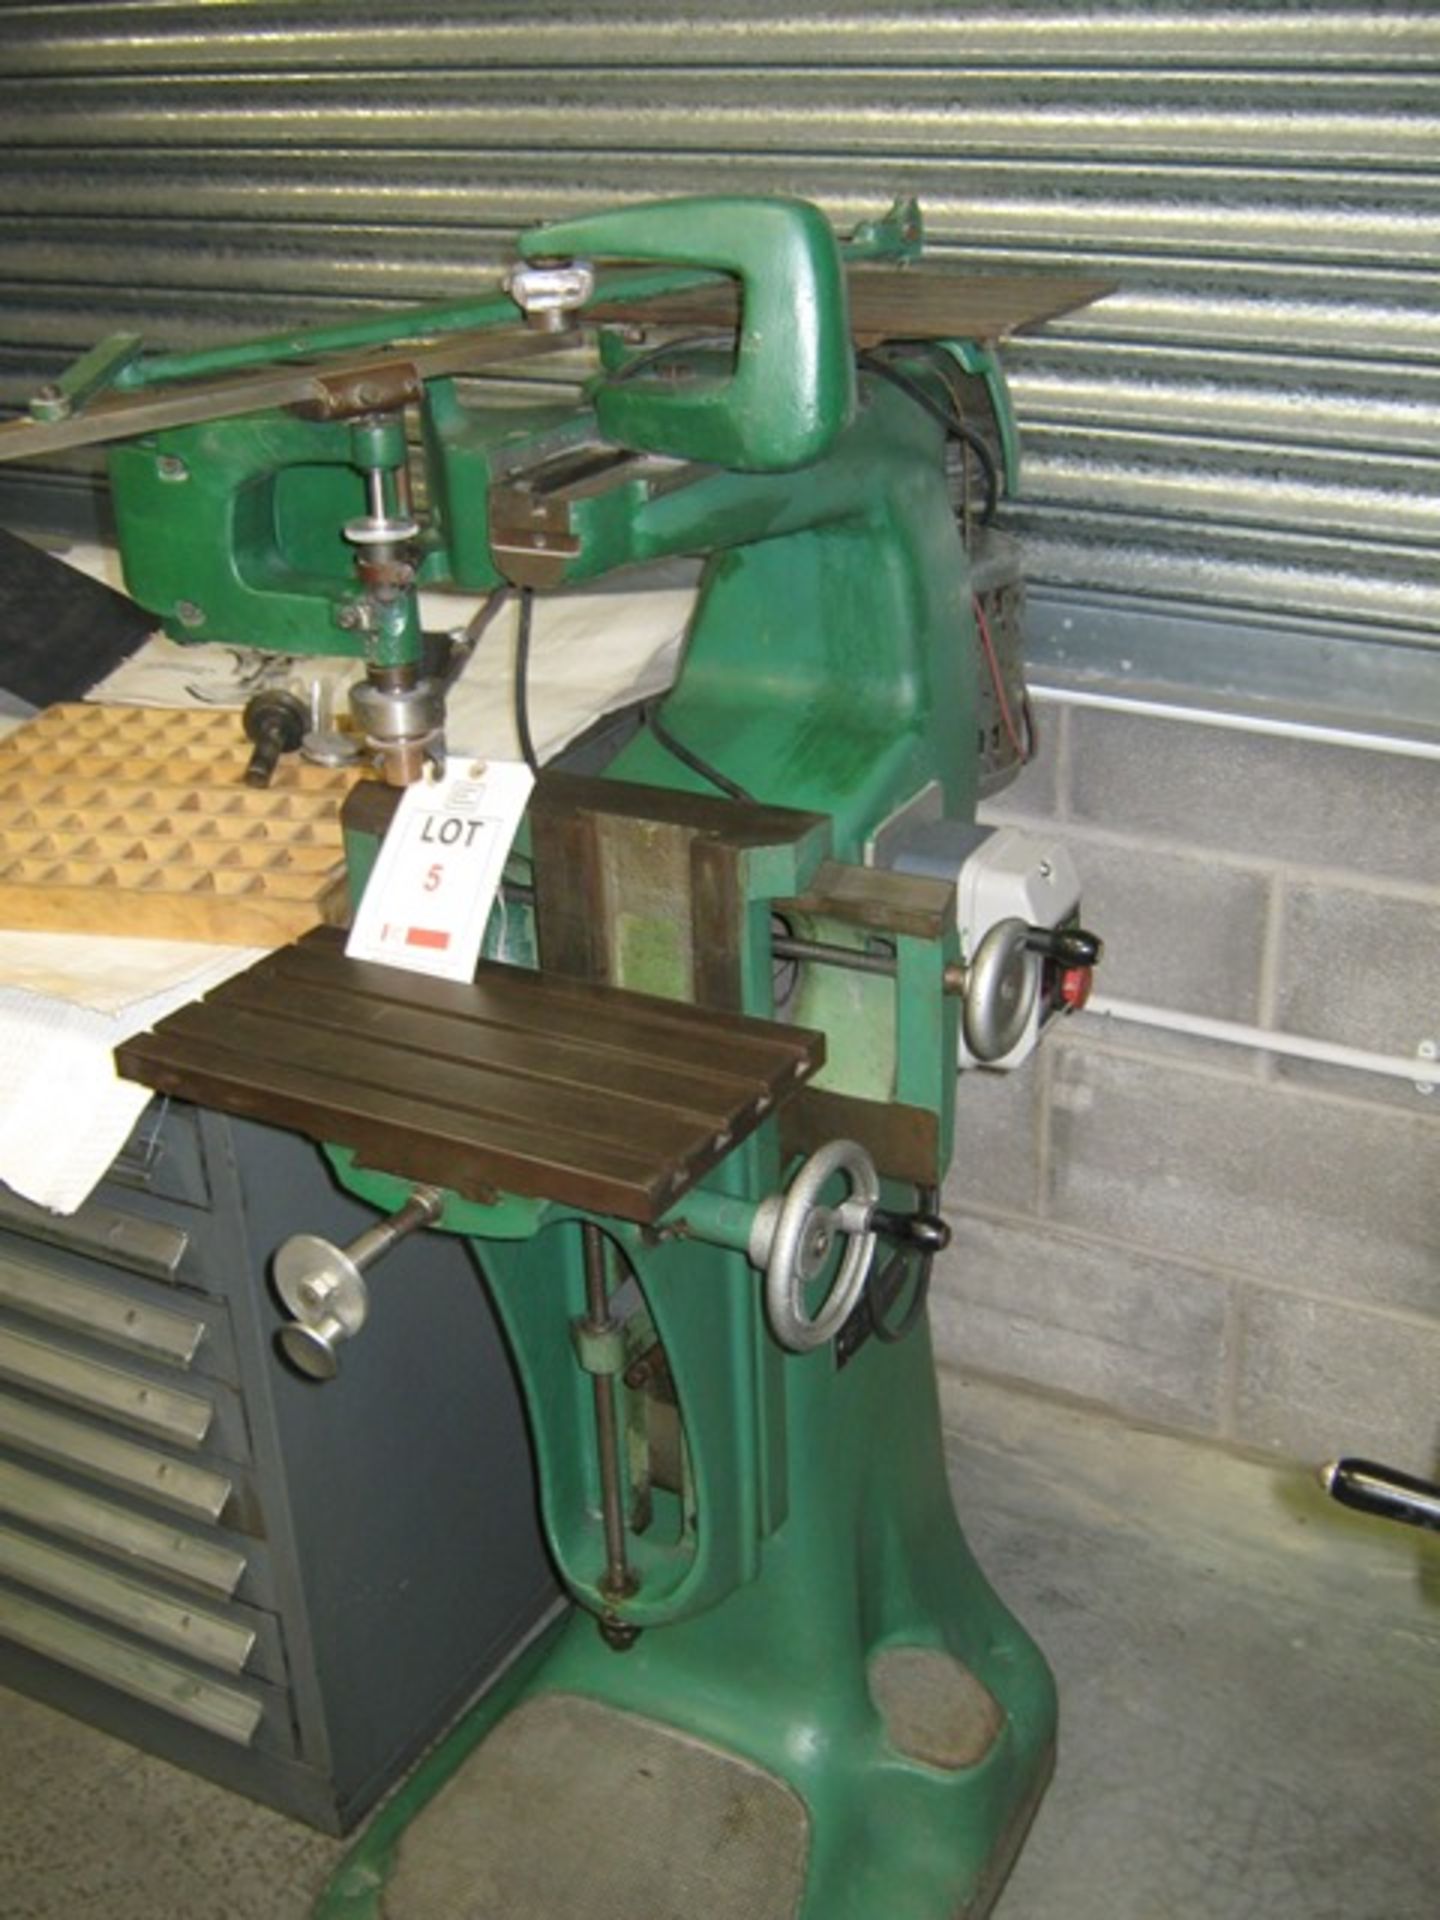 Taylor Hobson Engraver Machine with script as shown